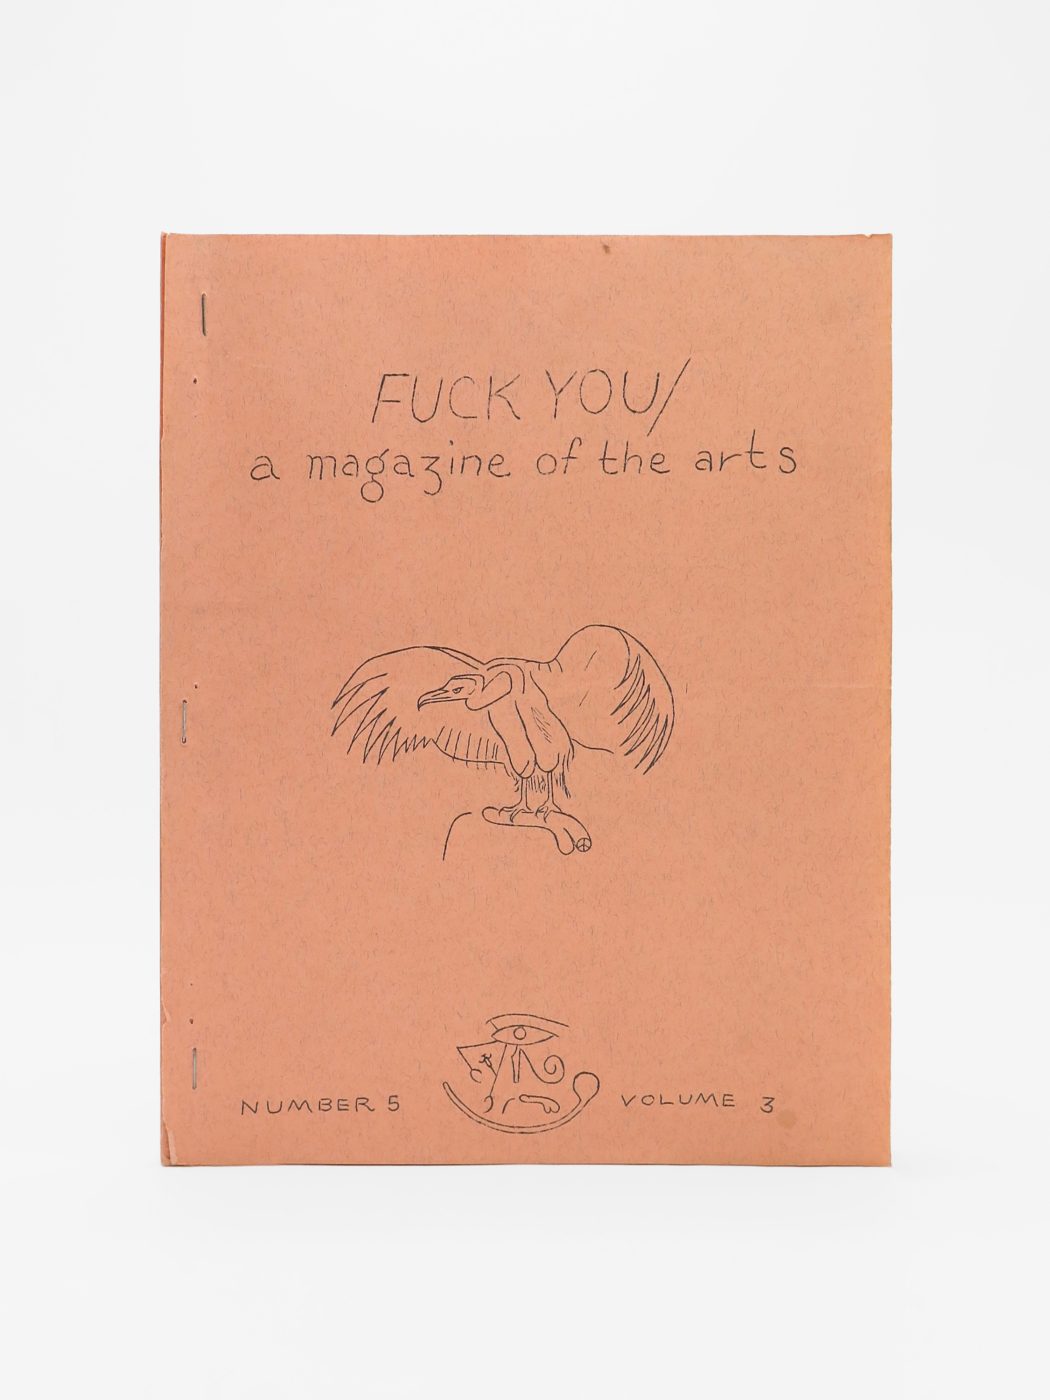 FUCK YOU / A Magazine of the Arts